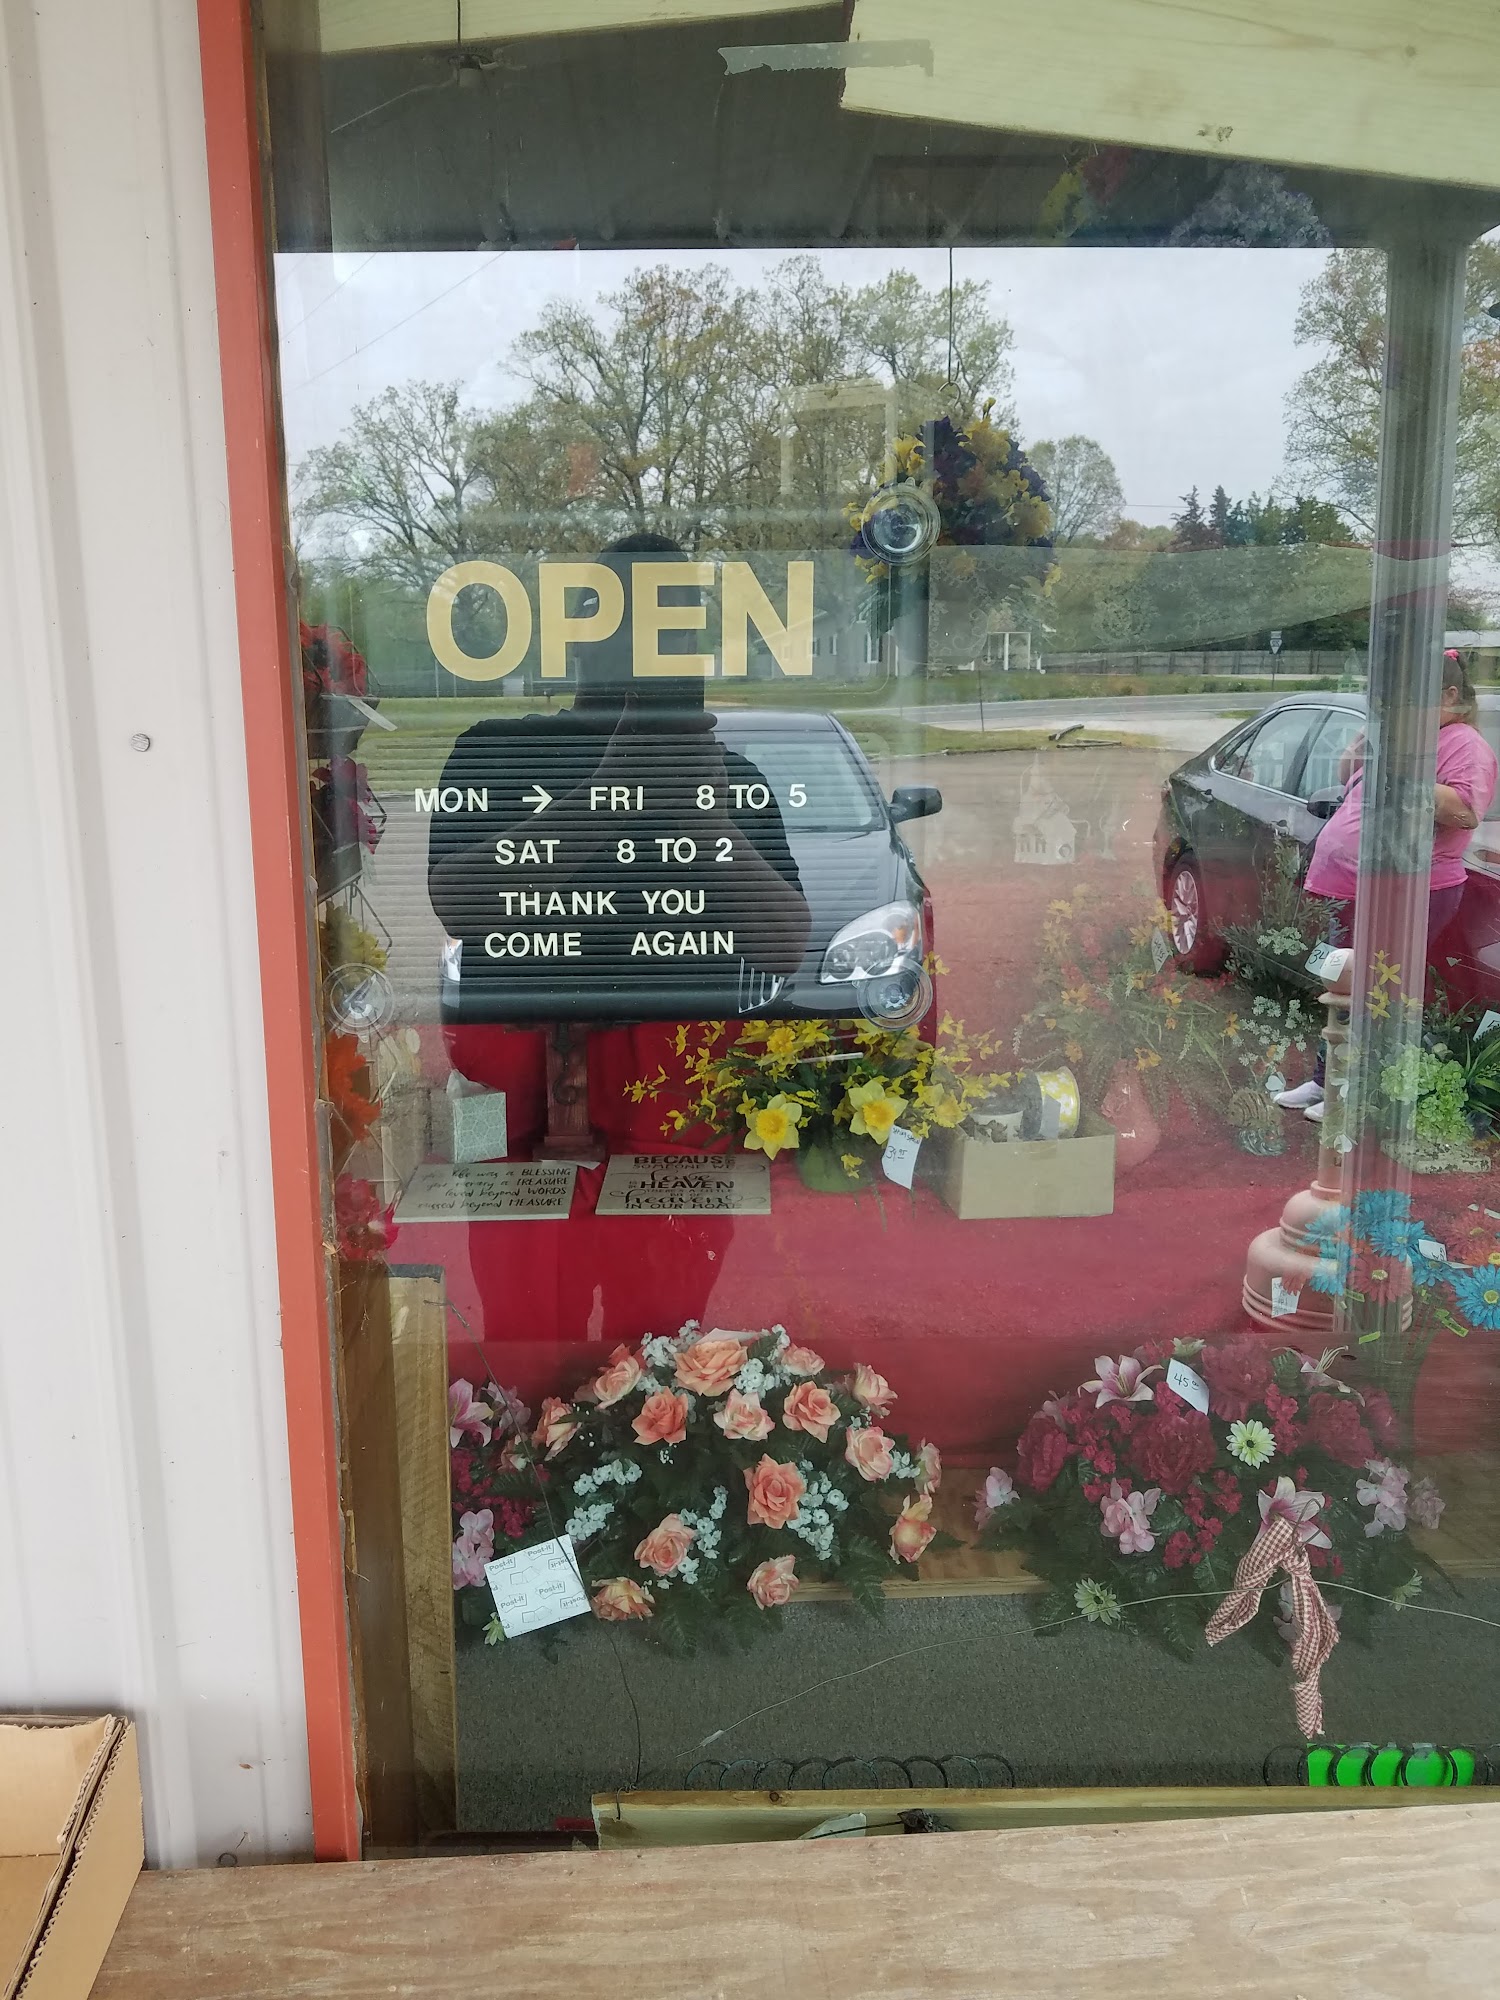 Helen's Flowers 551 Middleburg Rd, Decaturville Tennessee 38329